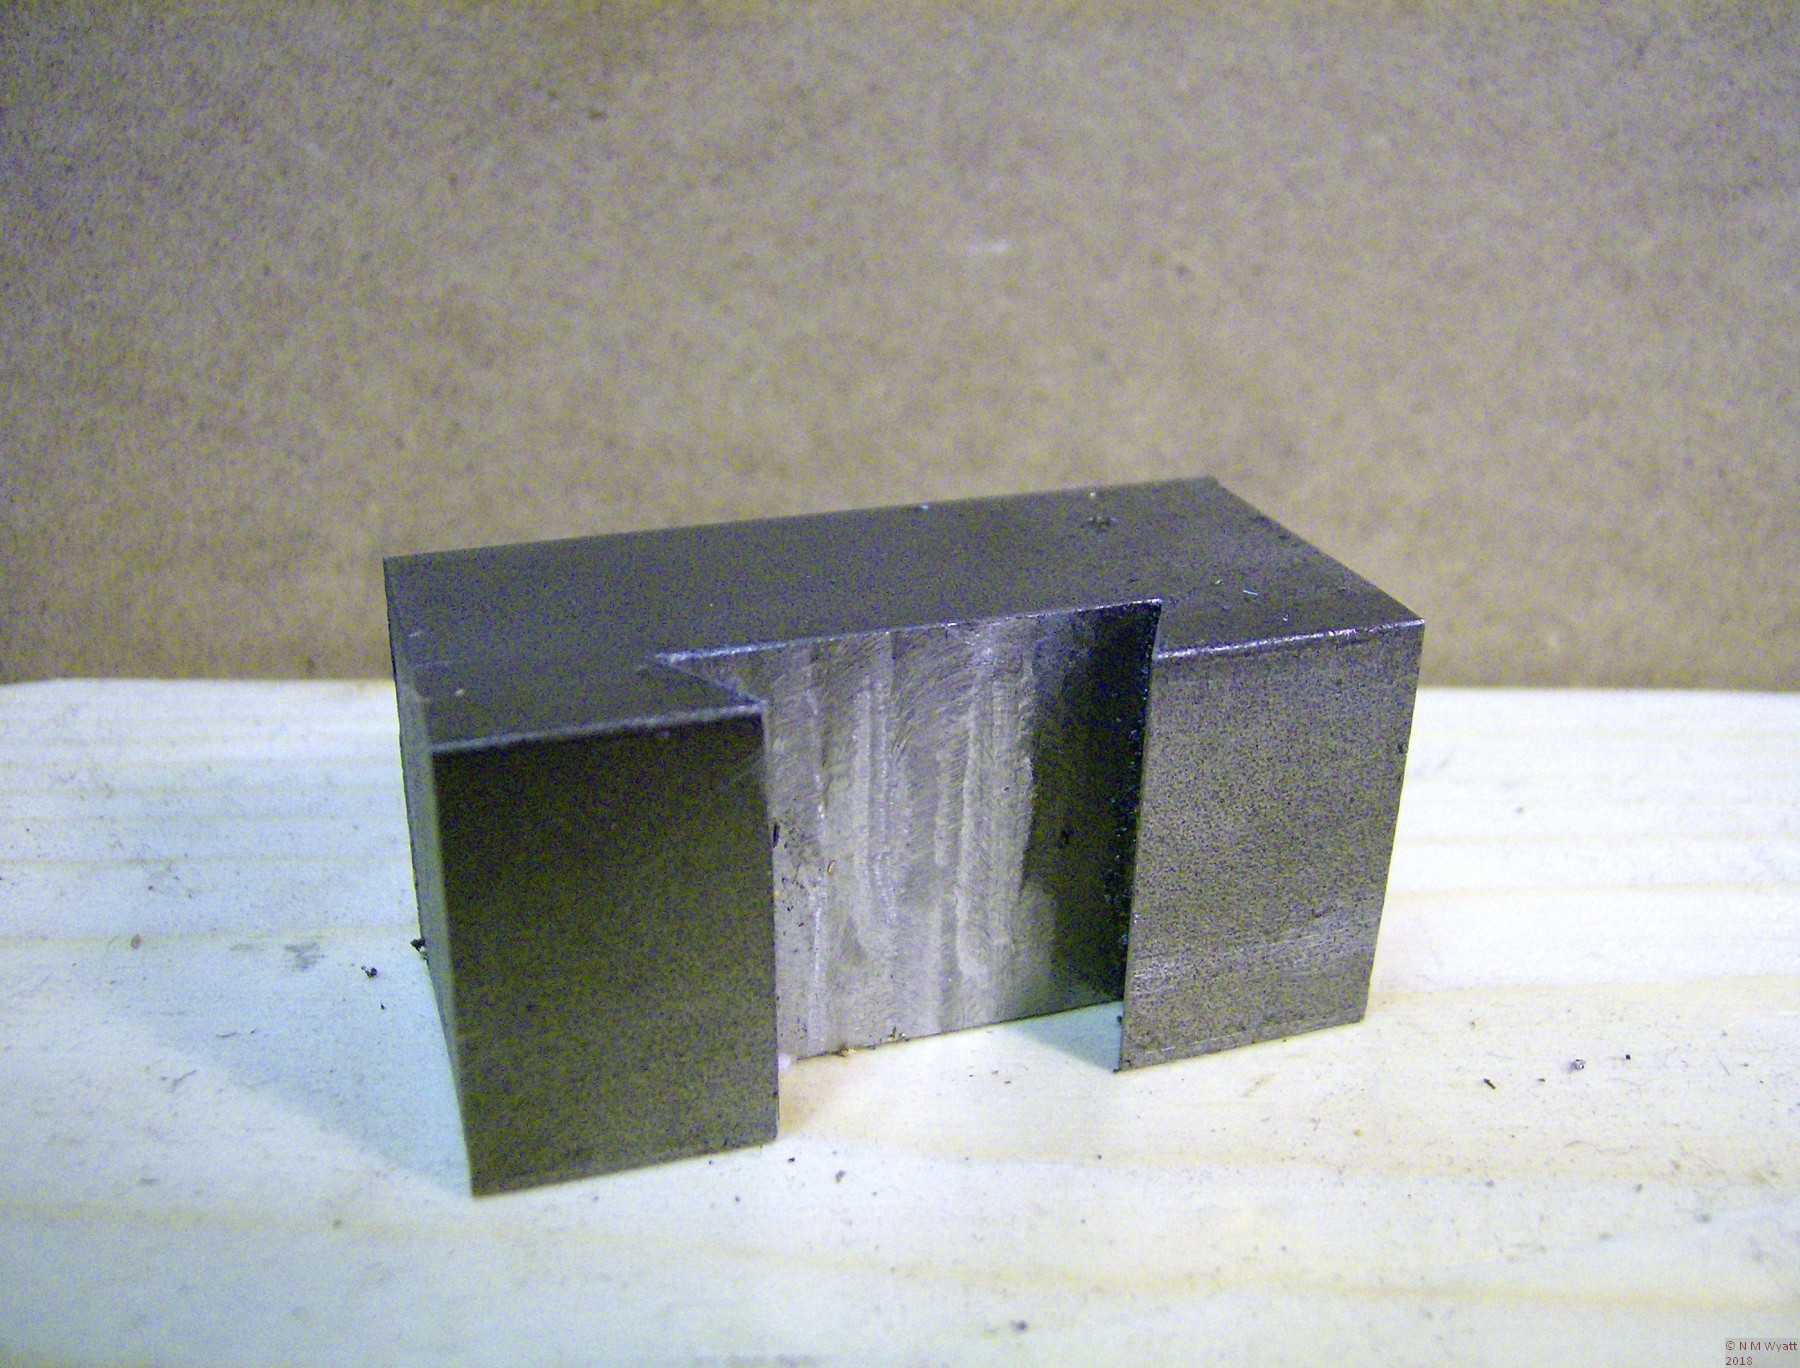 A finished toolholder blank with its dovetail